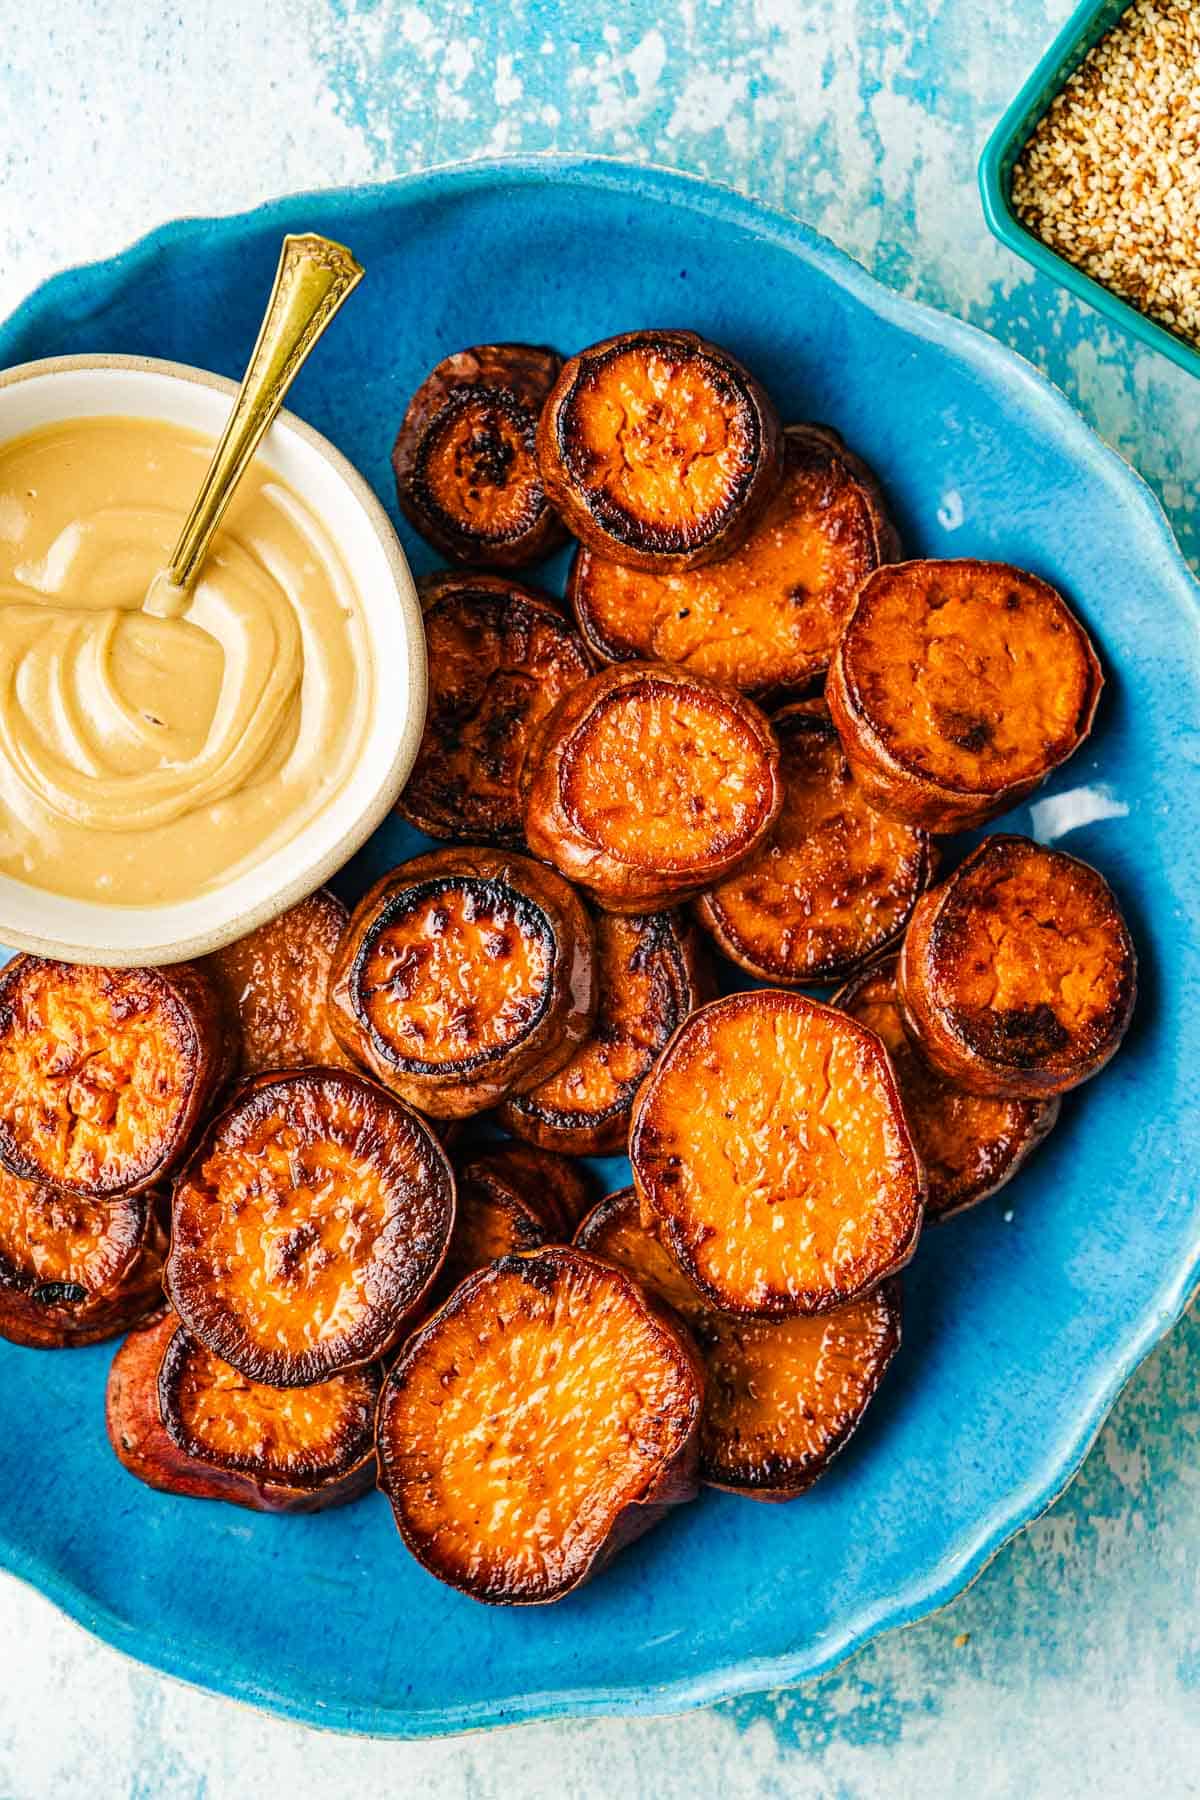 Roasted sweet potatoes on a blue shallow bowl with a white bowl of honeyed tahini on the side.